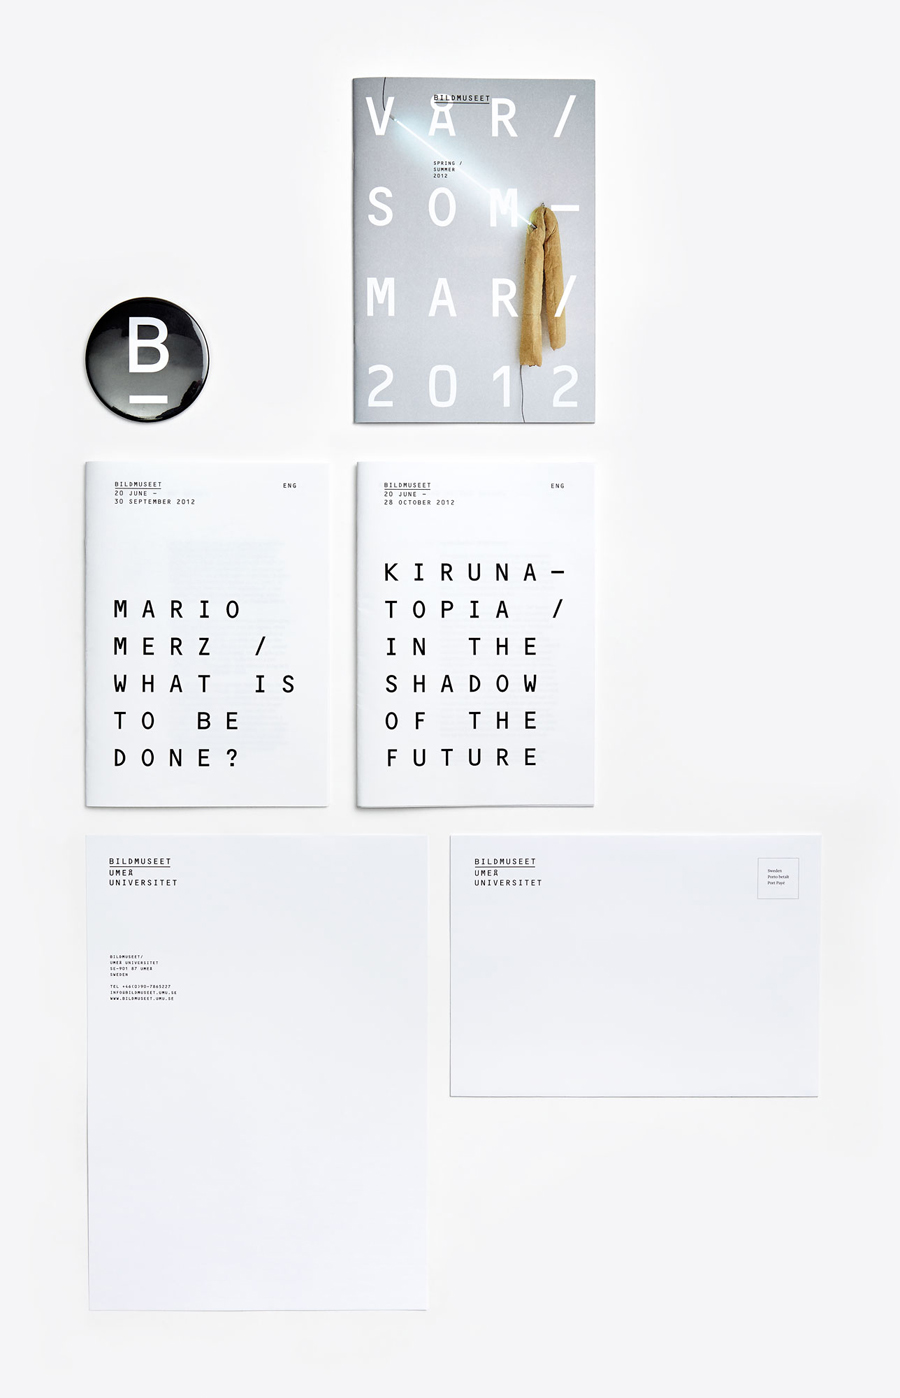 Visual identity and stationery by Stockholm Design Lab for Swedish University museum and contemporary arts centre Bildmuseet.